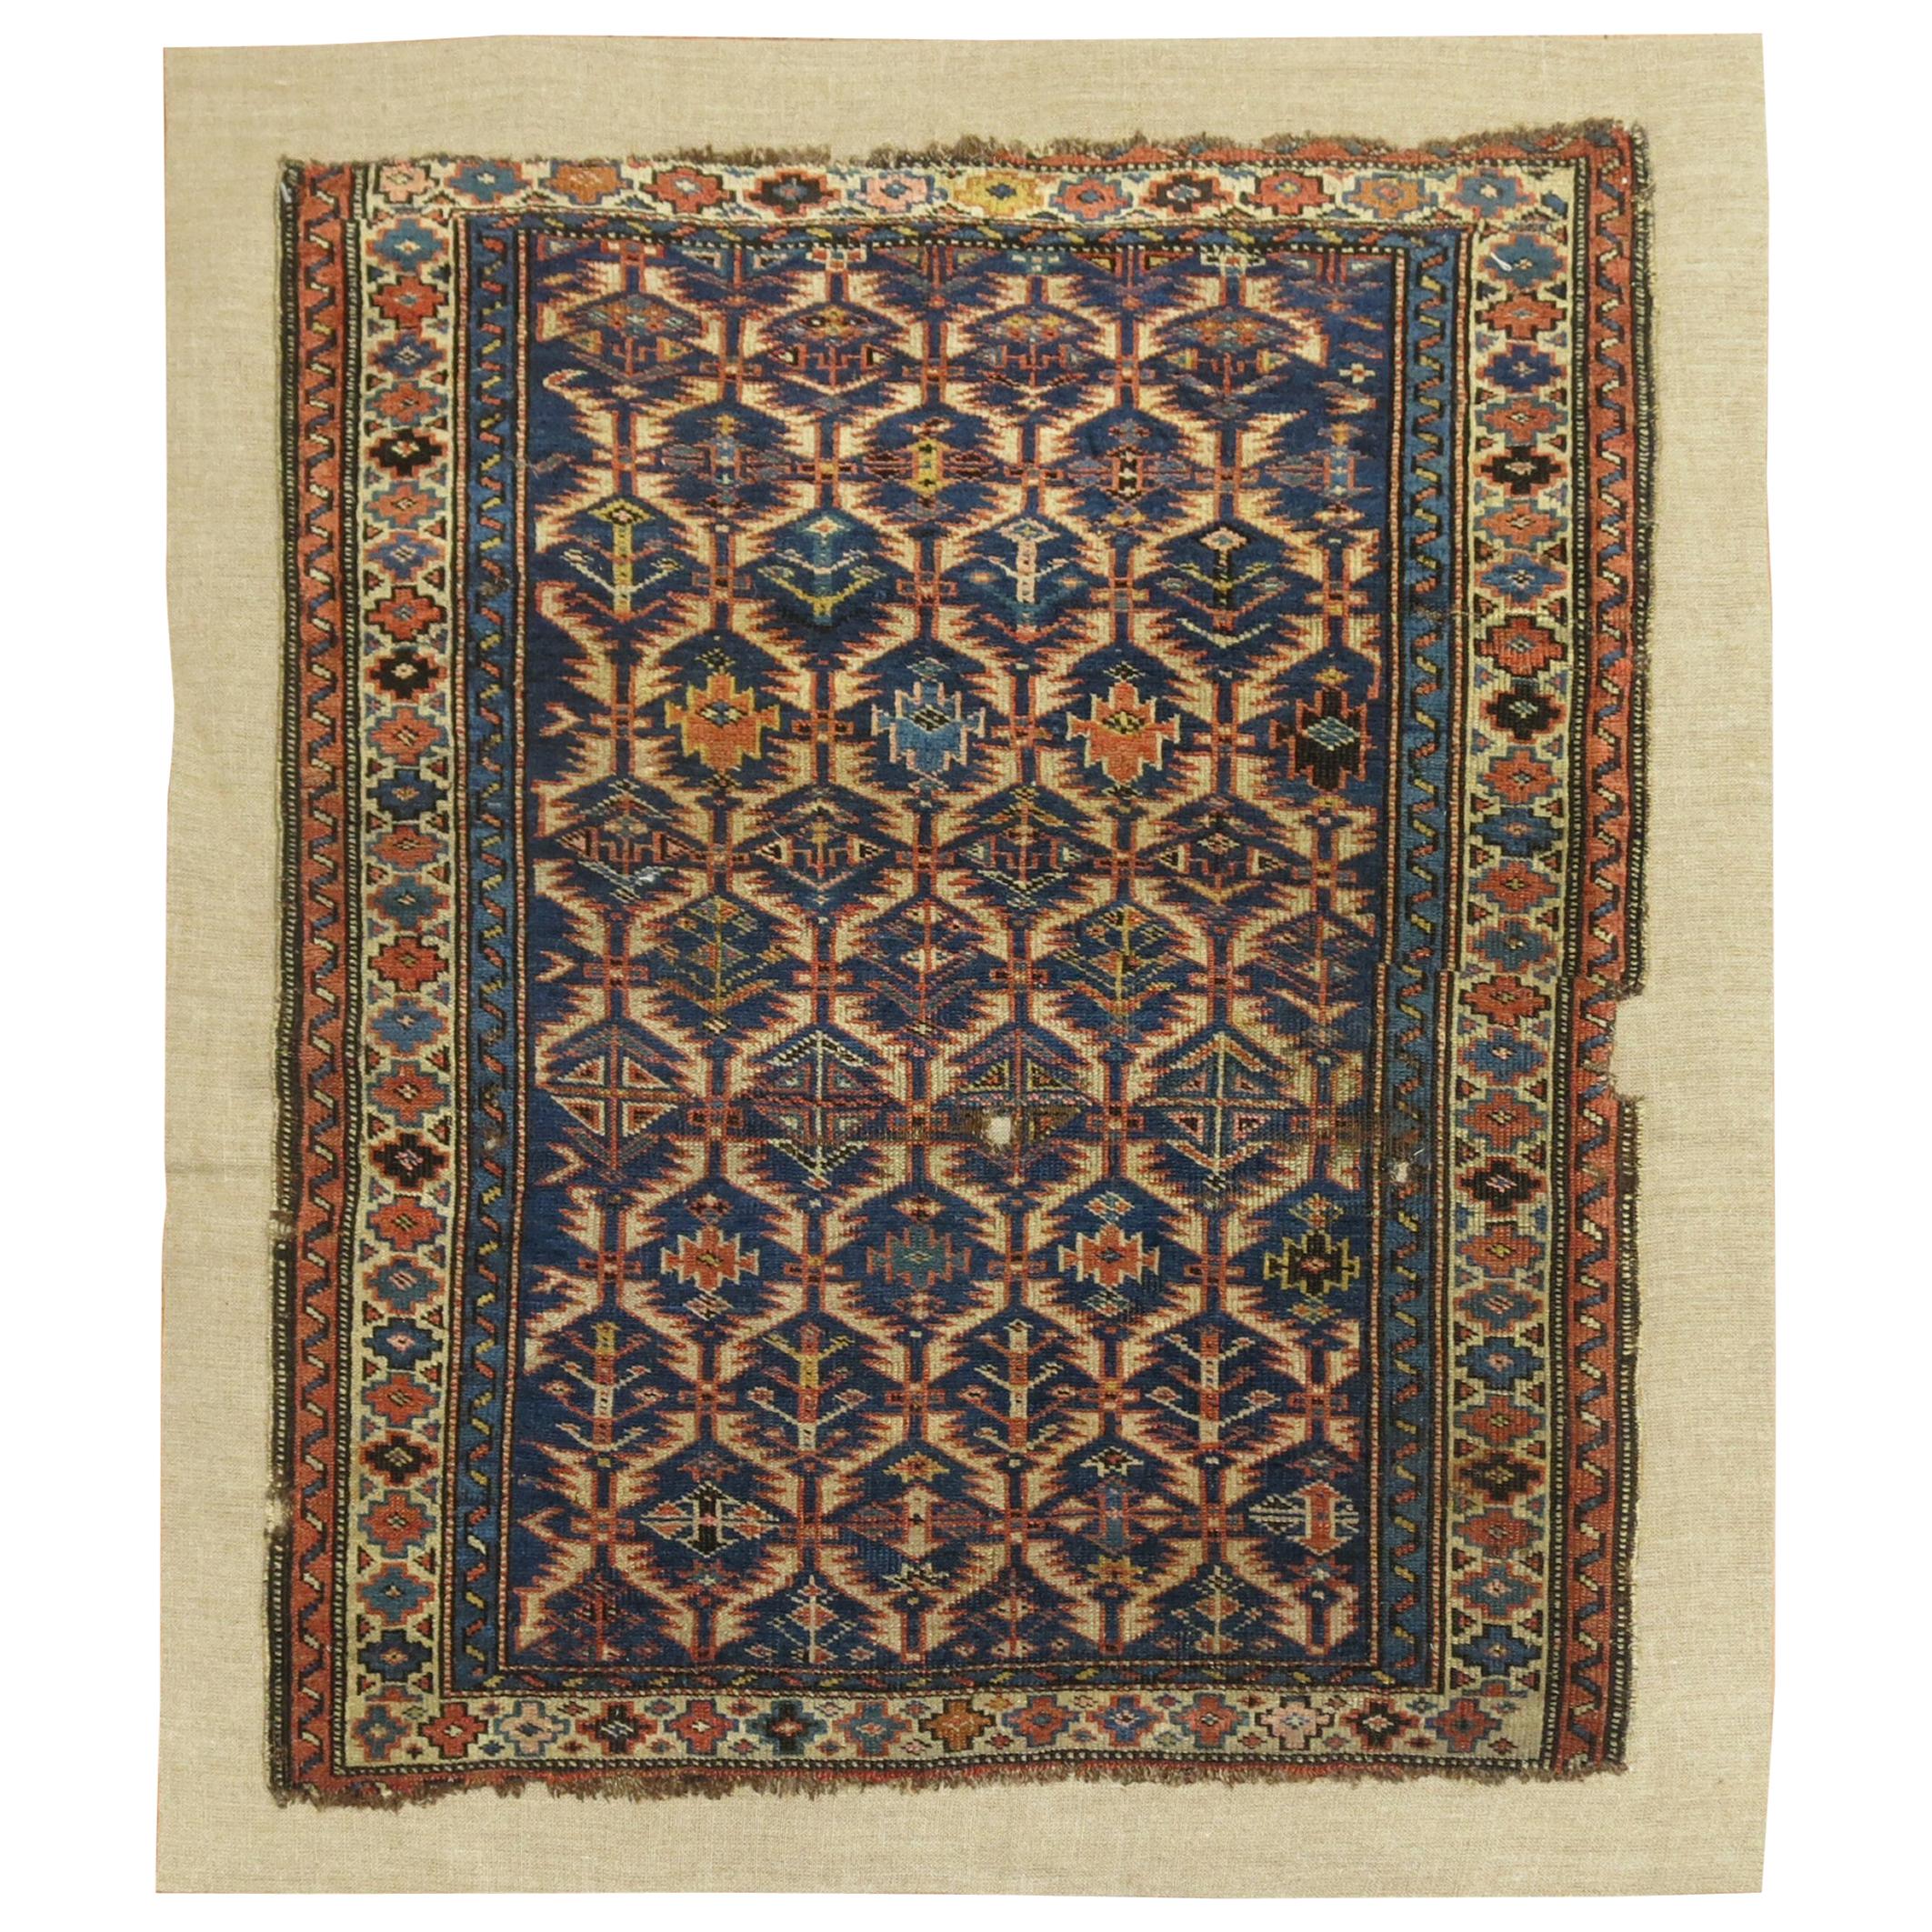 Antique Caucasian Rug Stitched on Linen For Sale